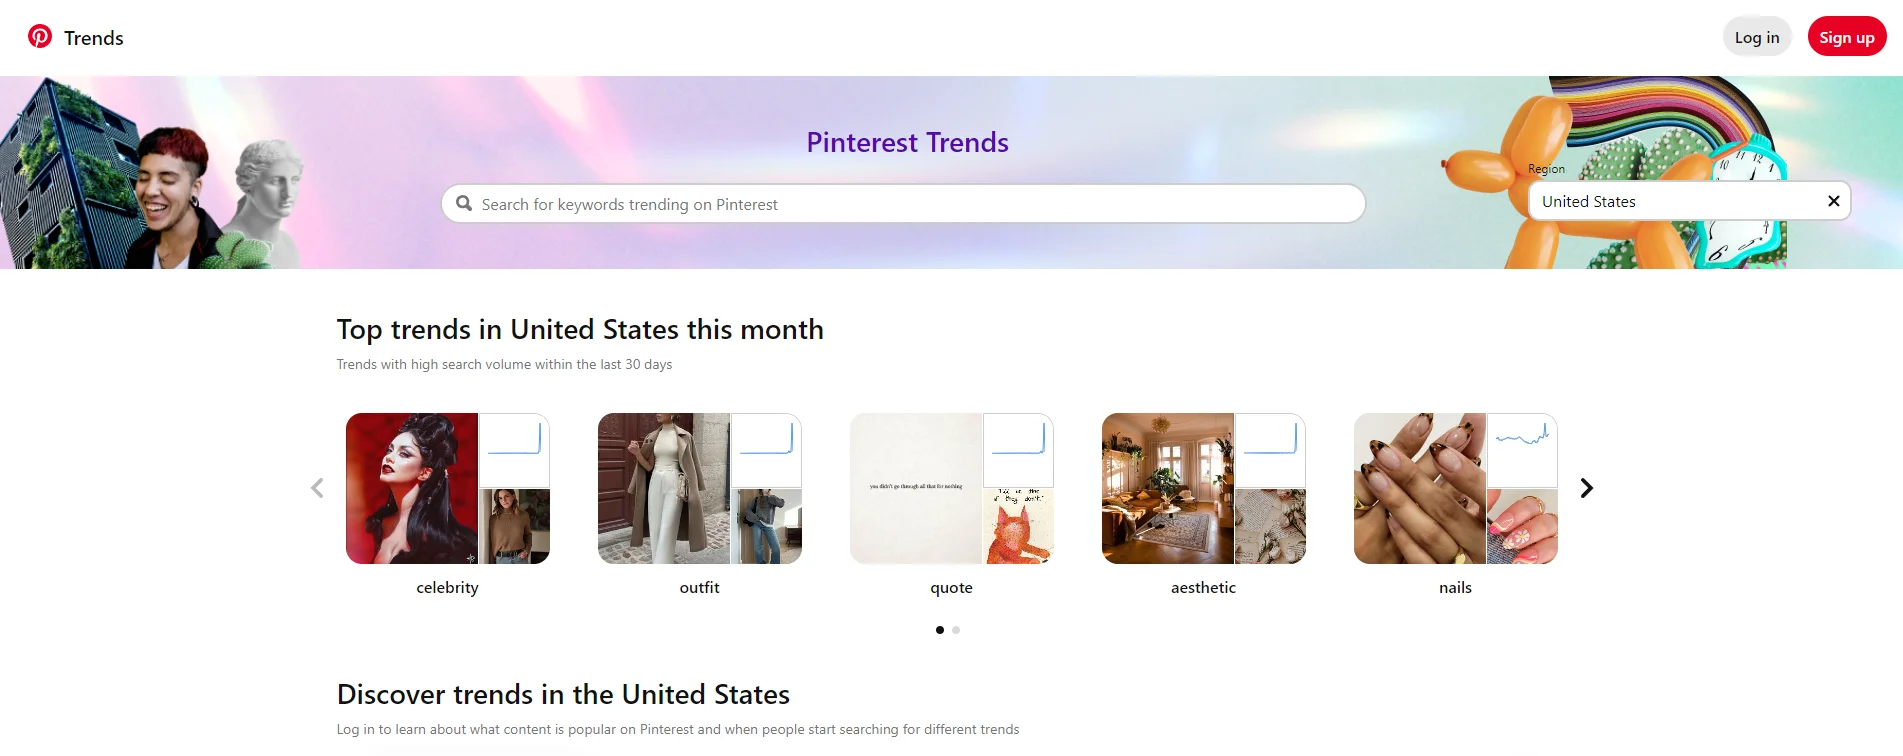 Pinterest trends home page